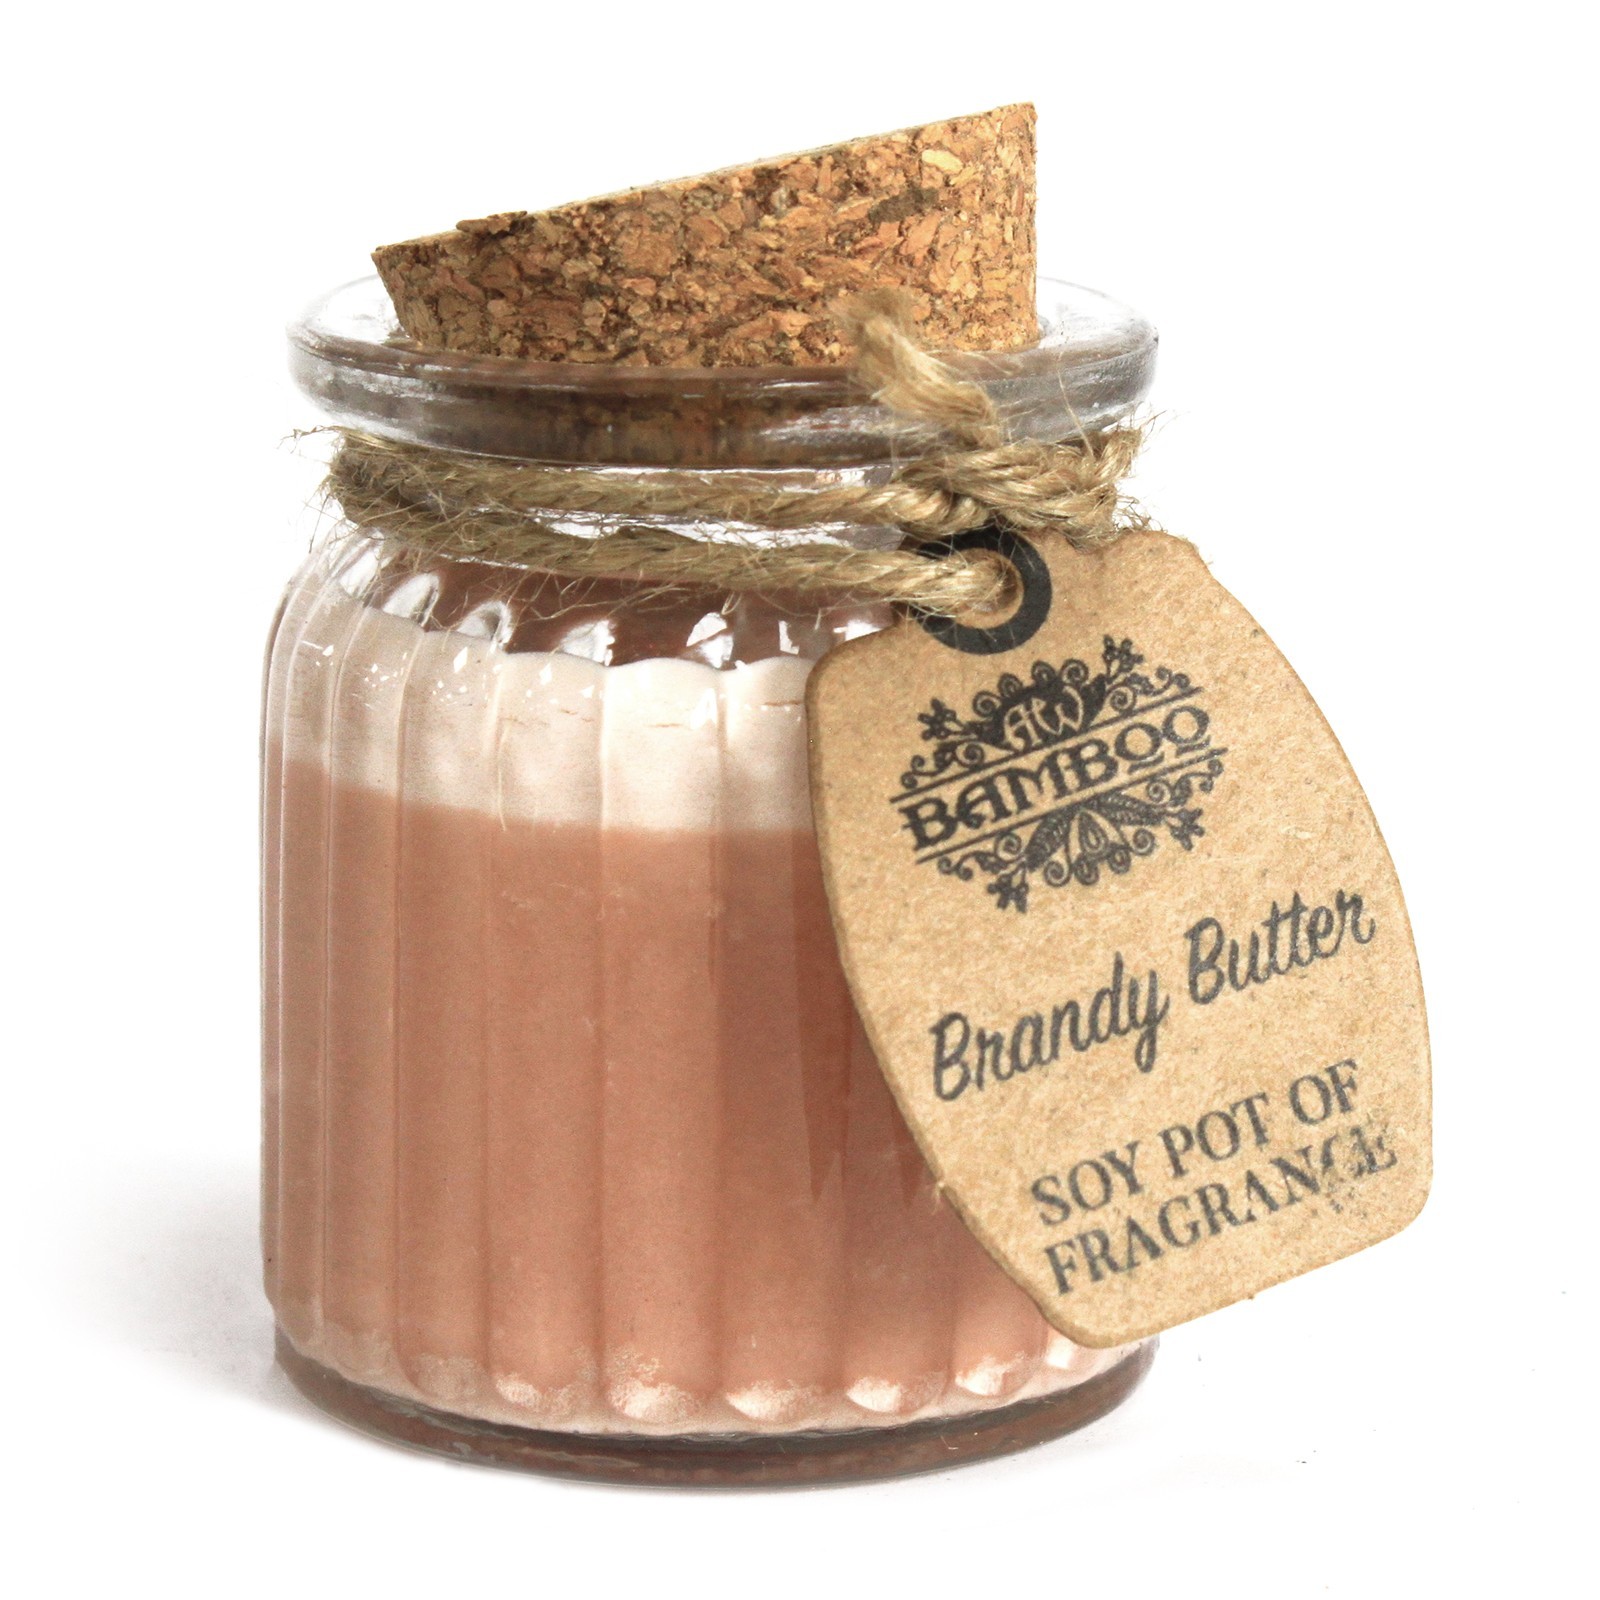 Brandy Butter Soy Pot of Fragrance Candle - SoyP-12